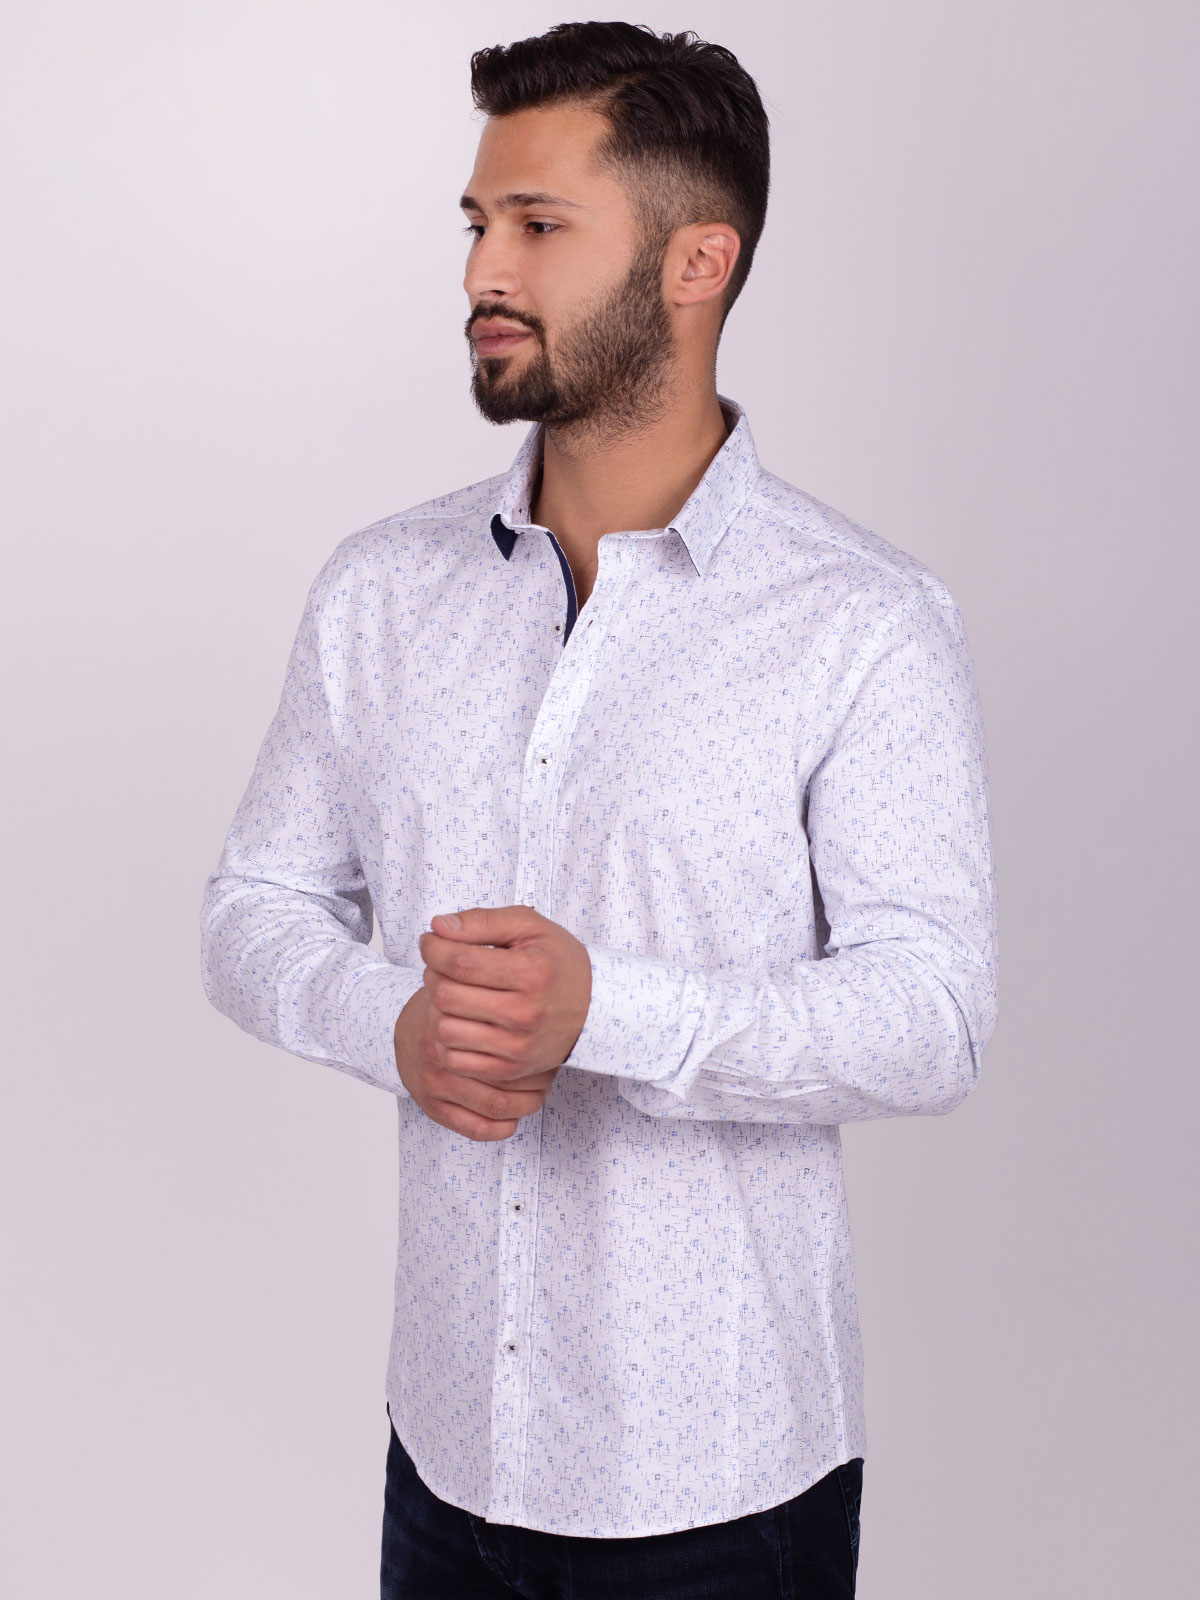 White shirt with a print of blue figures - 21515 € 43.87 img2